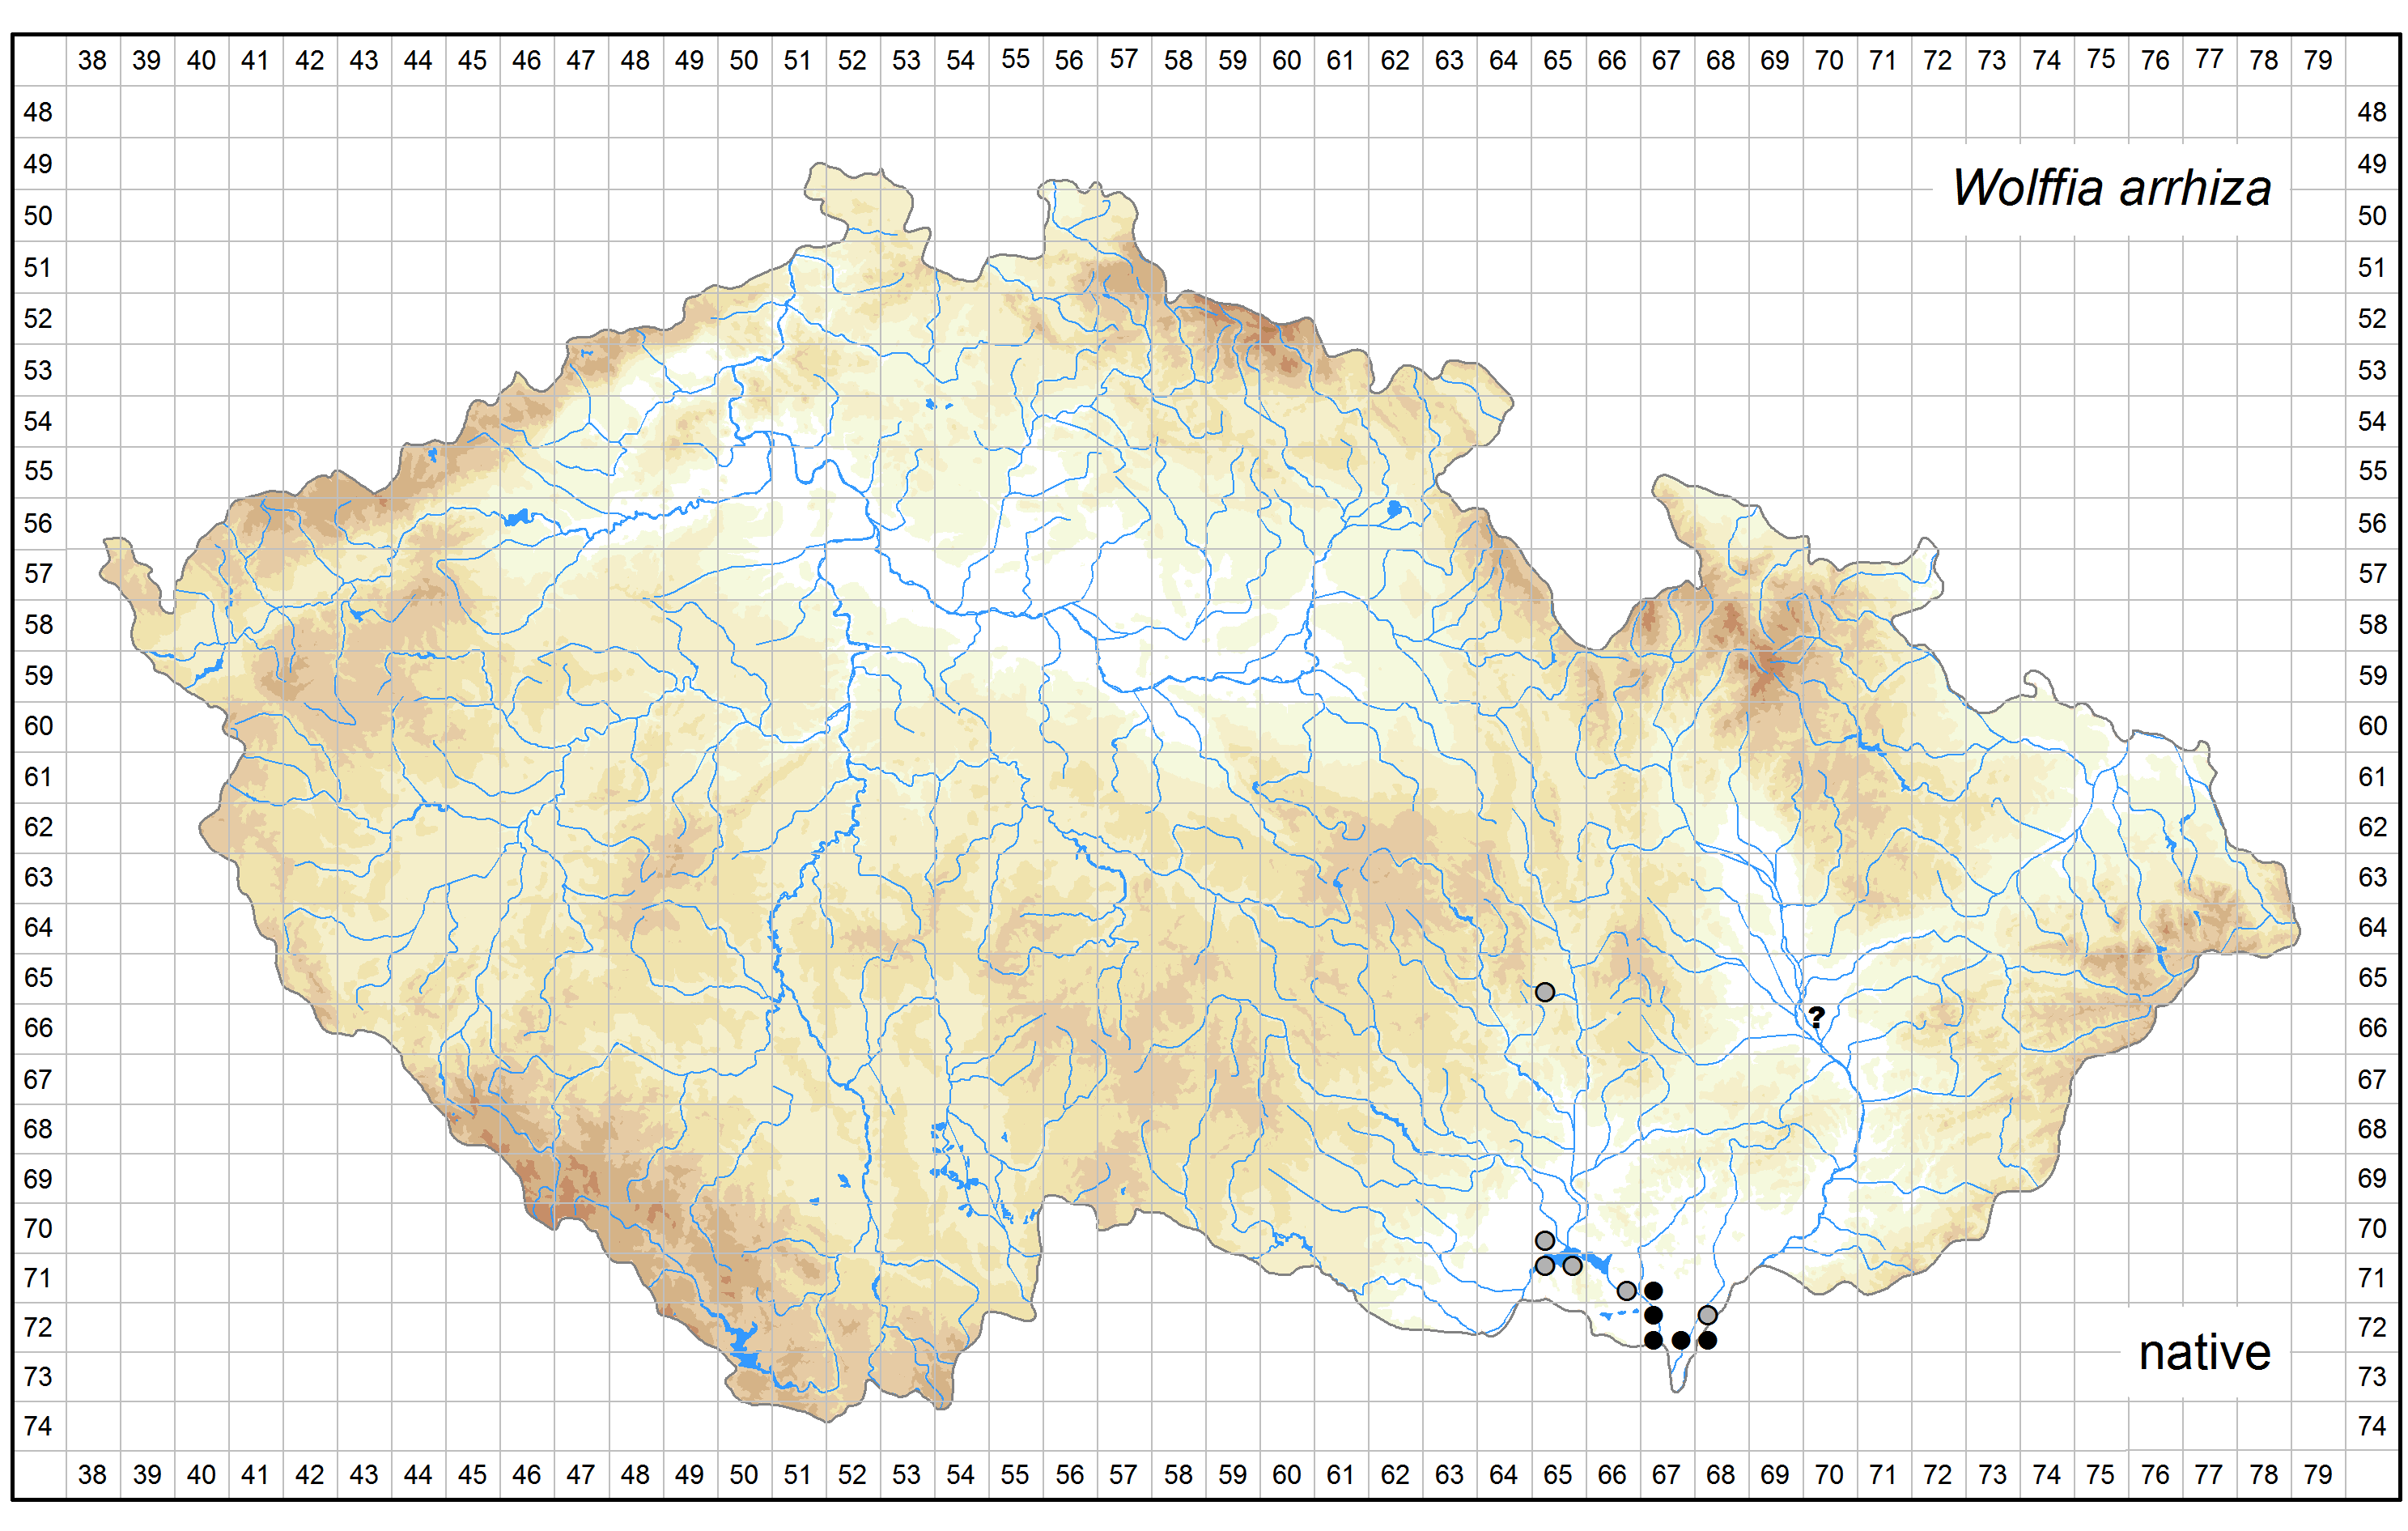 Distribution of Wolffia arrhiza in the Czech Republic Author of the map: Zdeněk Kaplan Map produced on: 11-11-2016 Database records used for producing the distribution map of Wolffia arrhiza